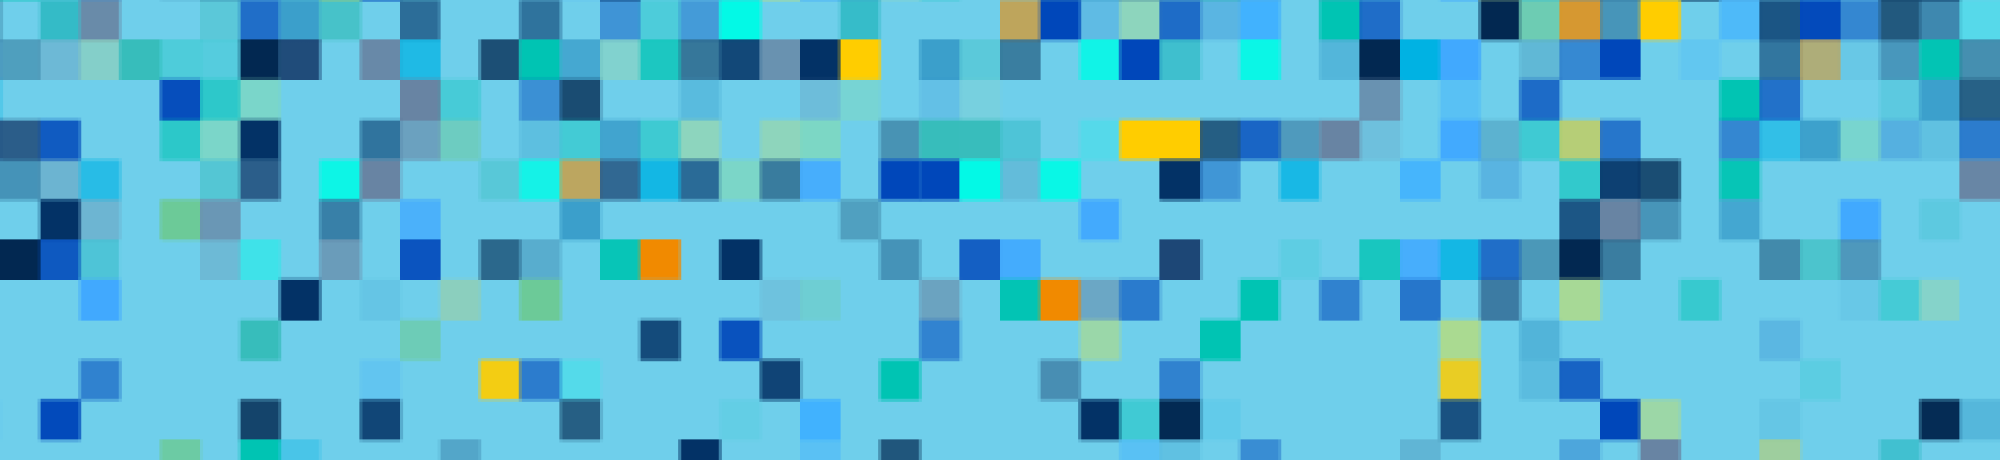 multi-colored blue, teal and gold pixels falling from top of screen over a light blue background